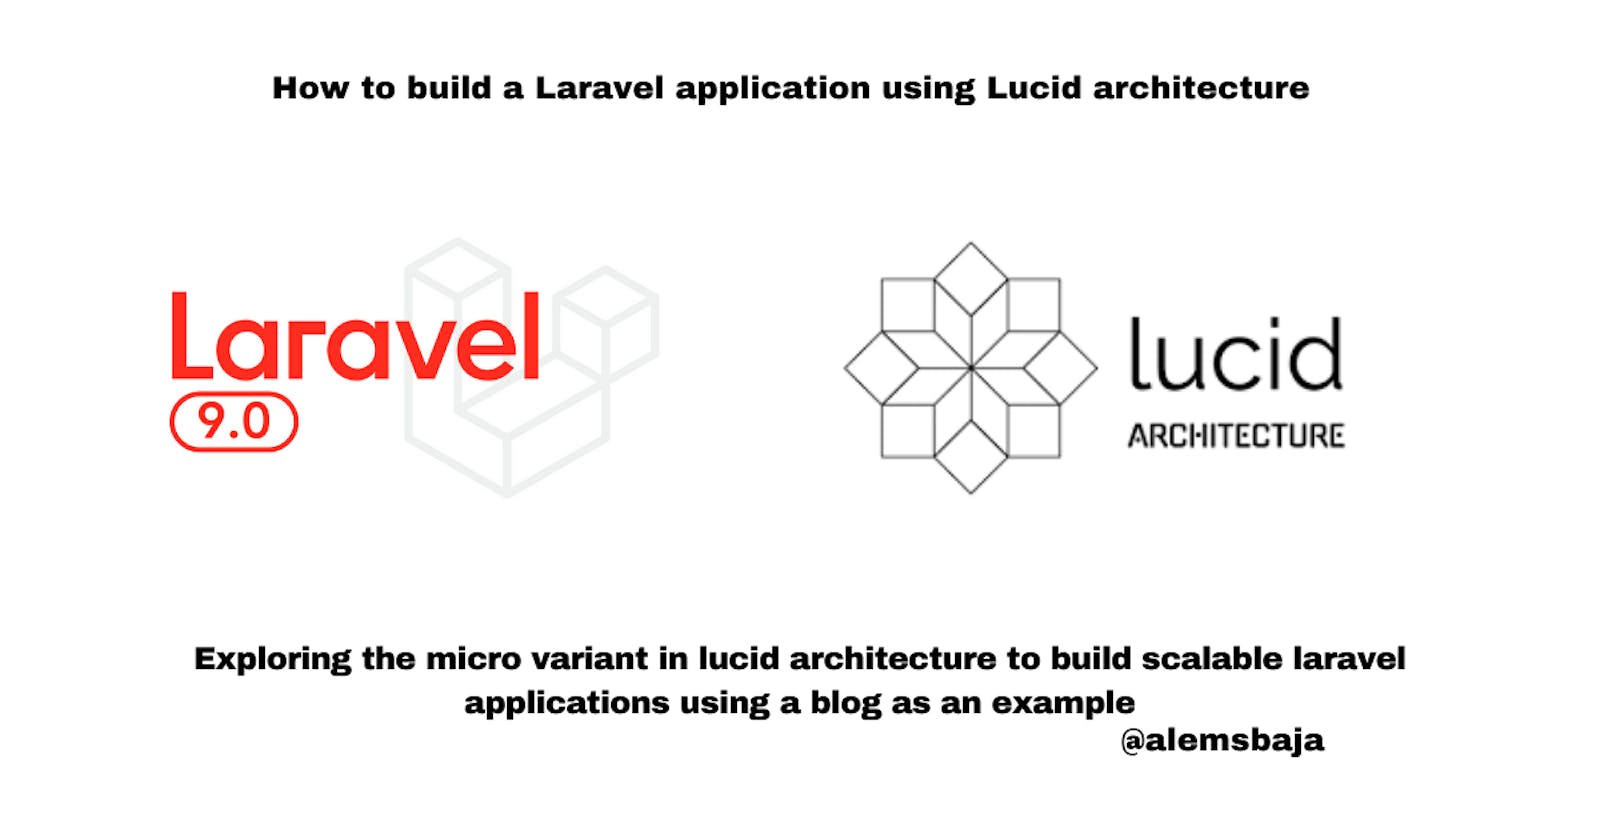 How to build a Laravel application using Lucid architecture